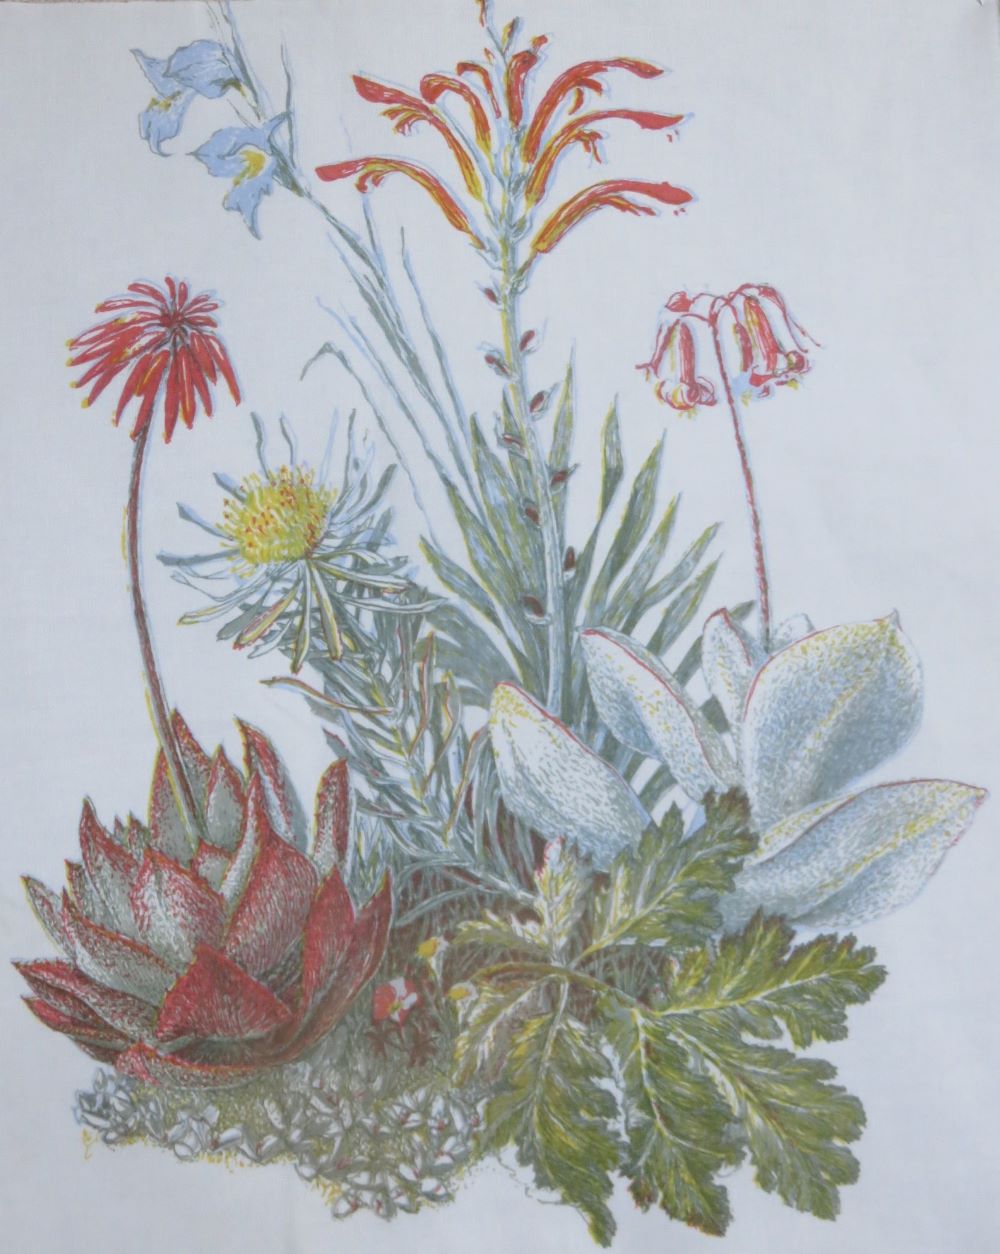 A selection of vegetation that grows on granite in the Renosterveld. A five color print.